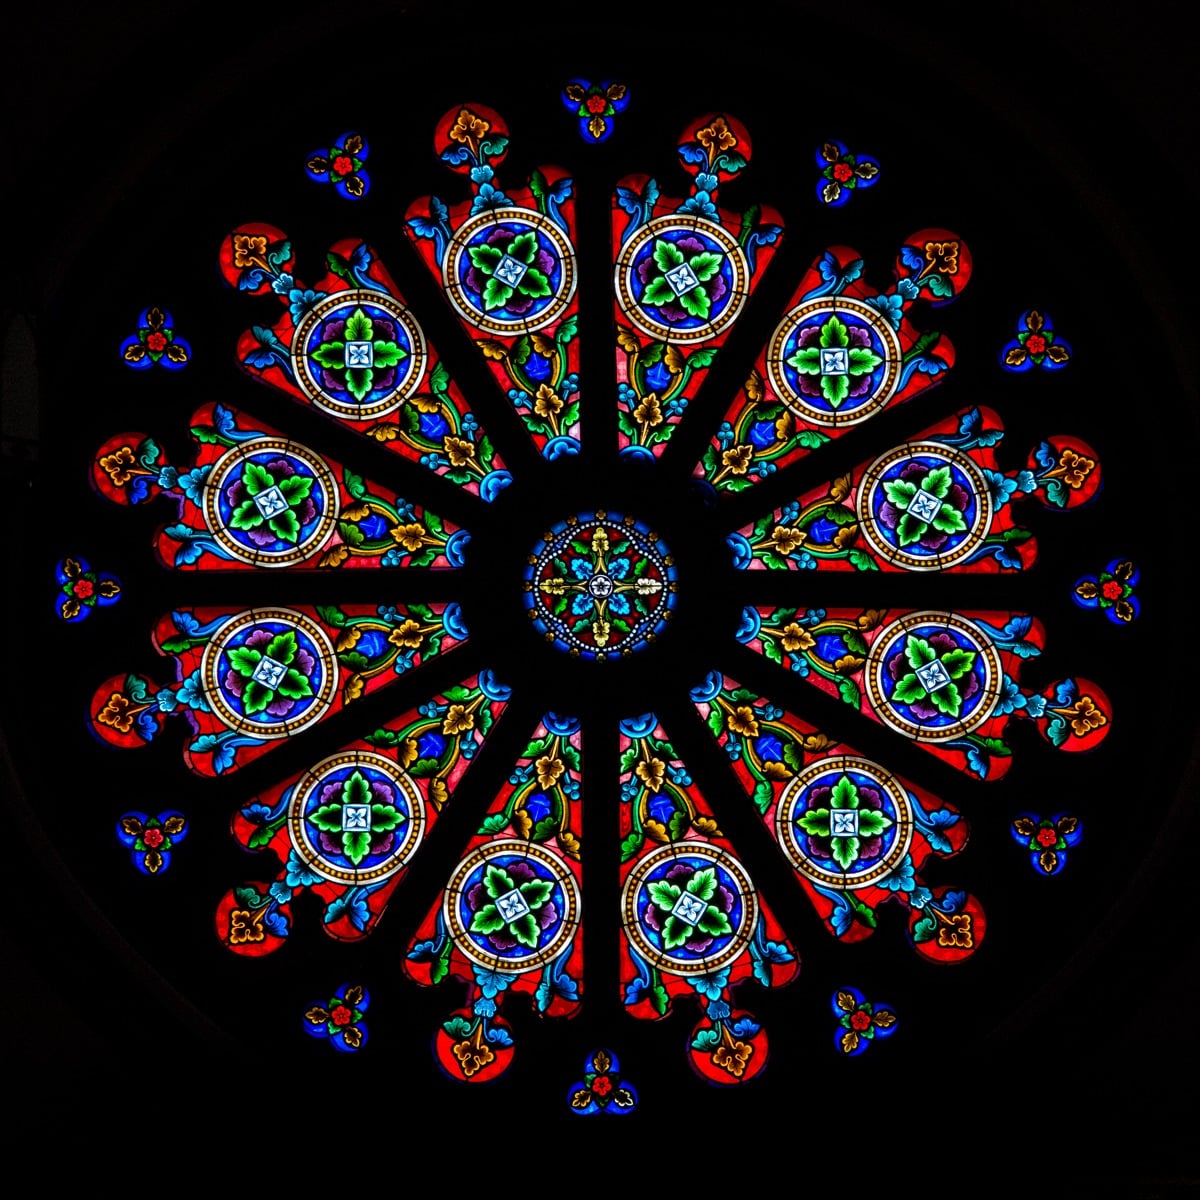 The large rose window, located in the narthex (or entrance) of the church, was imported from Clermont-Ferrand in France in the mid- to late-1800s.